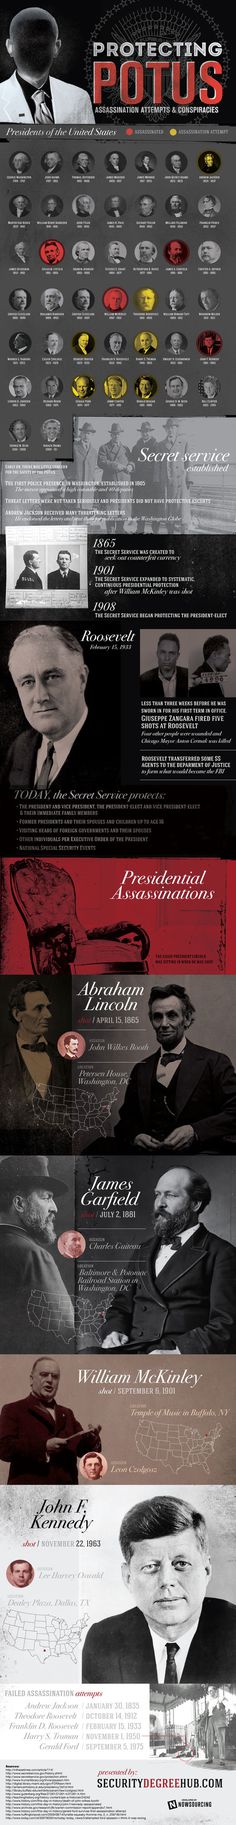 Protecting the President of the US: Assassinations, Attempts and Conspiracies #secret #president #service #potus #assassination